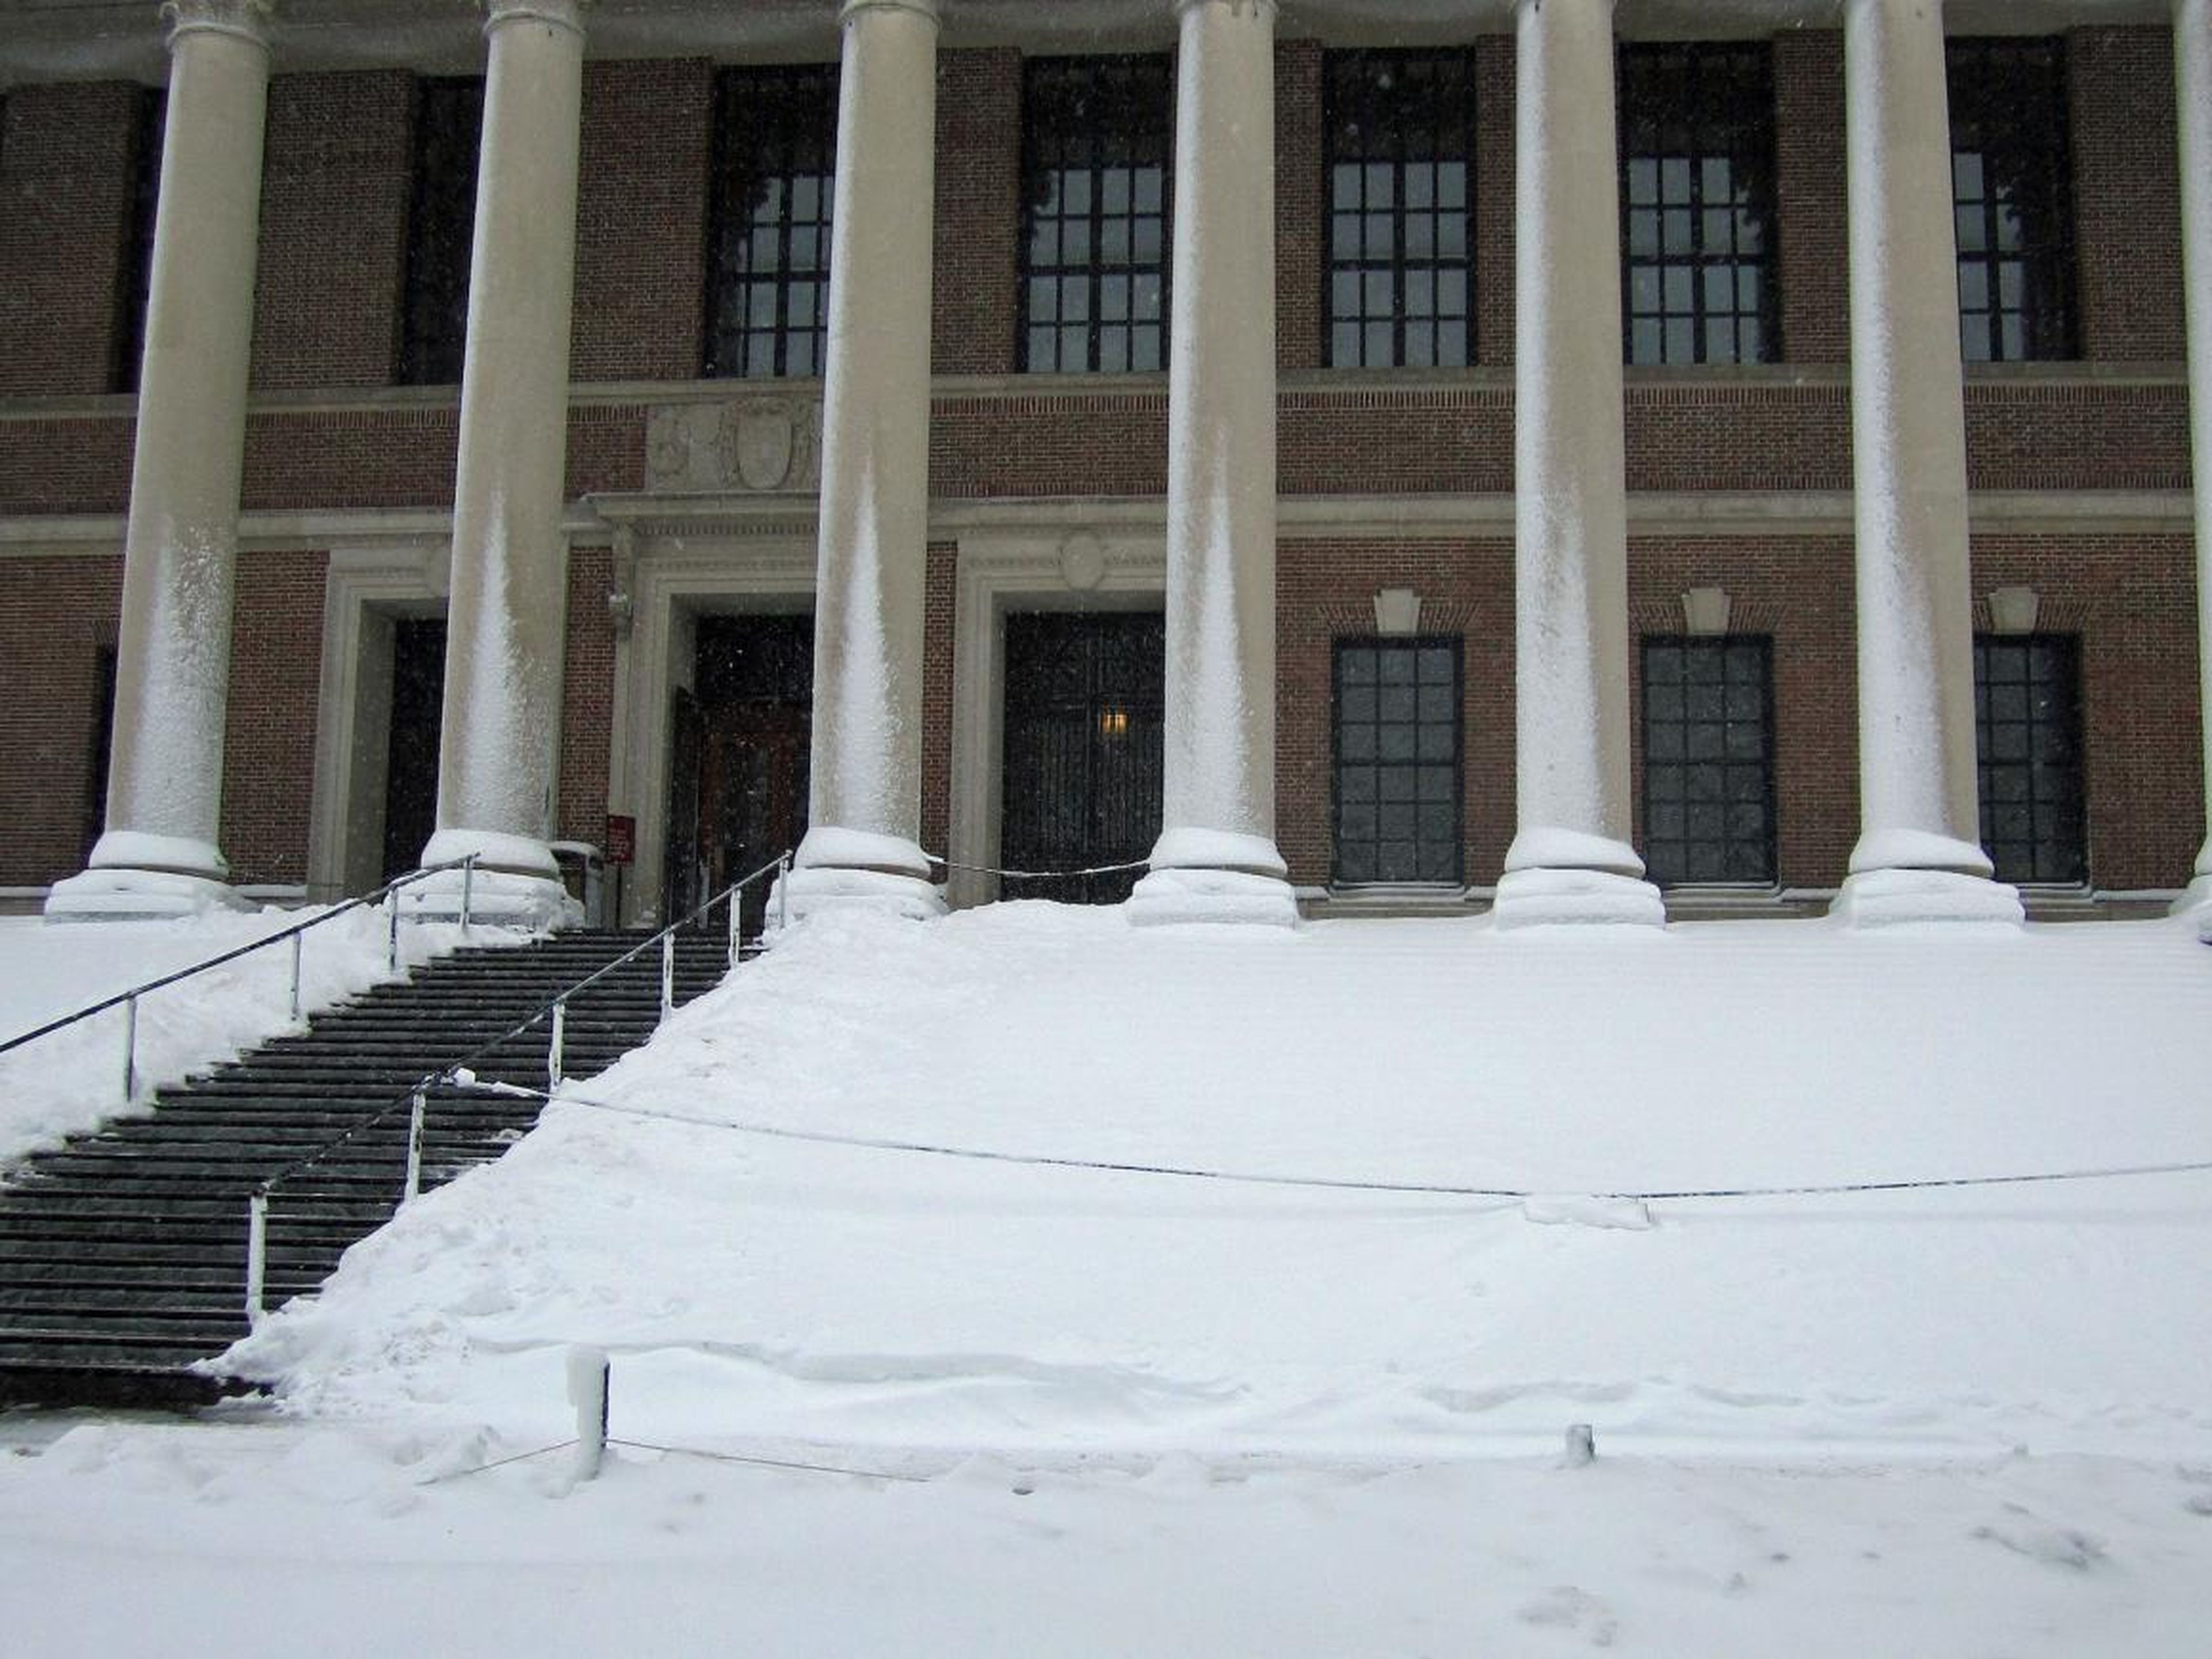 Especially if you get a snow day — yes, Harvard has those — and you plan on taking part in the time-honored tradition of sledding down the snowy slopes of Widener Library.